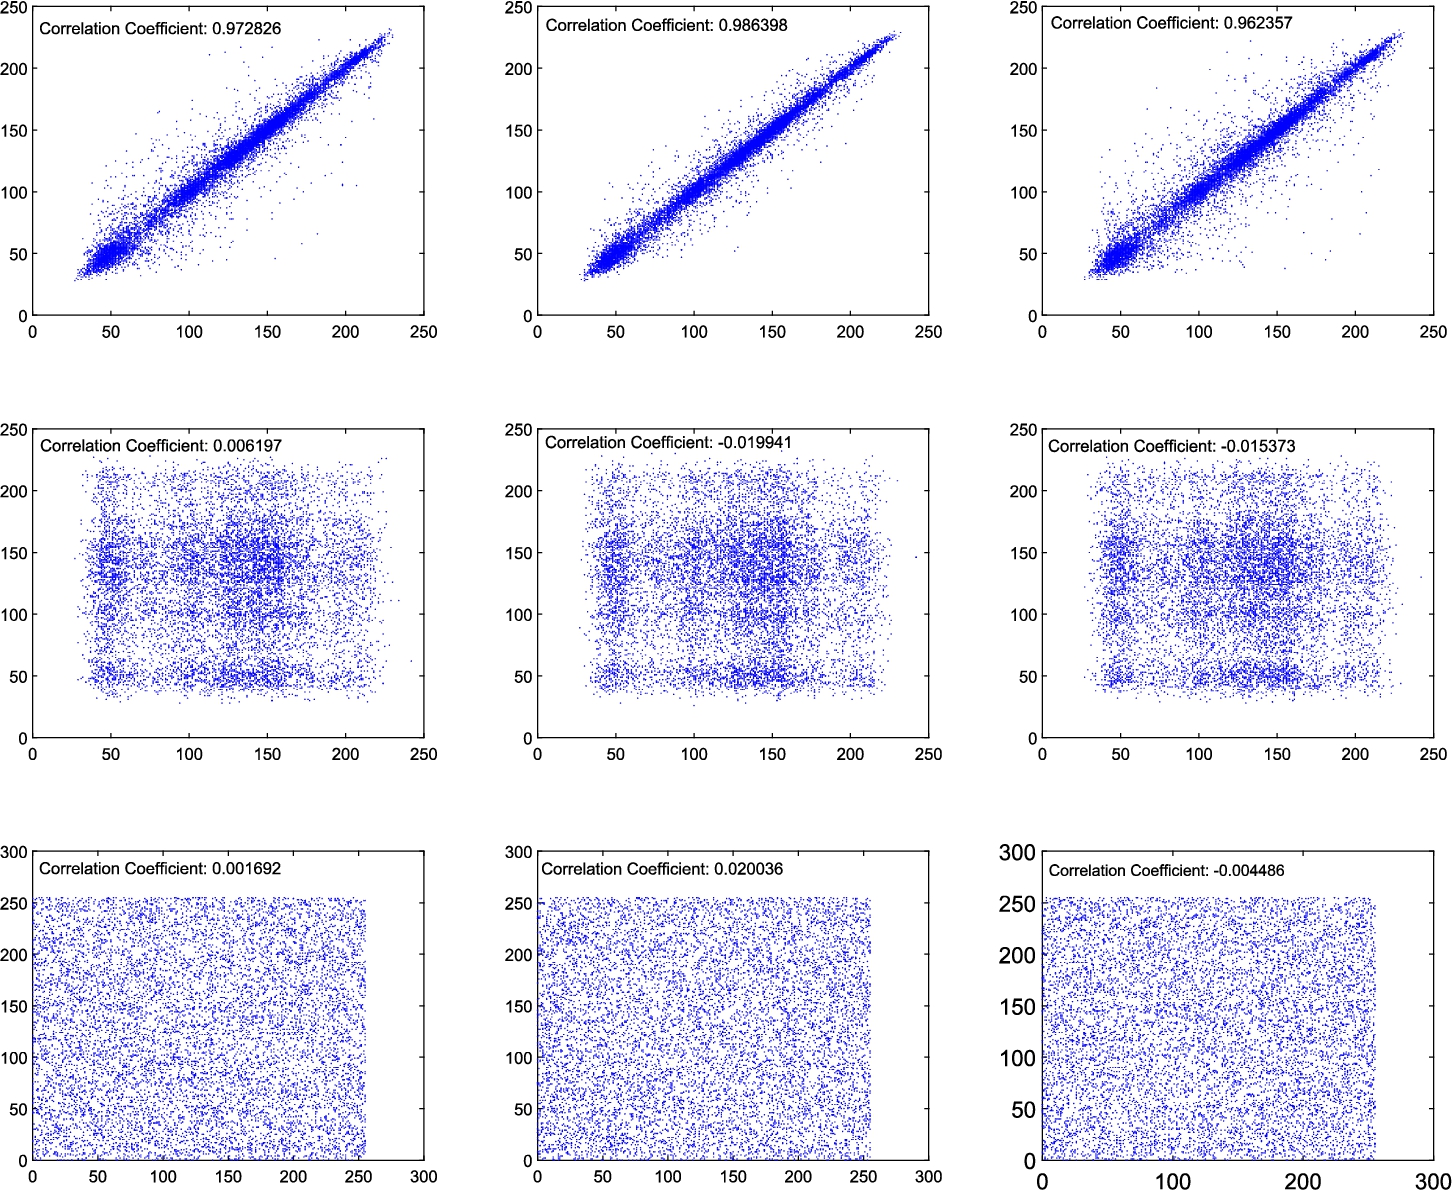 Point plots of the intensity values of randomly chosen pairs of horizontally, vertically and diagonally adjacent pixels in the plain-image Lena (top), its corresponding shuffle-image (middle) and cipher-image (bottom).